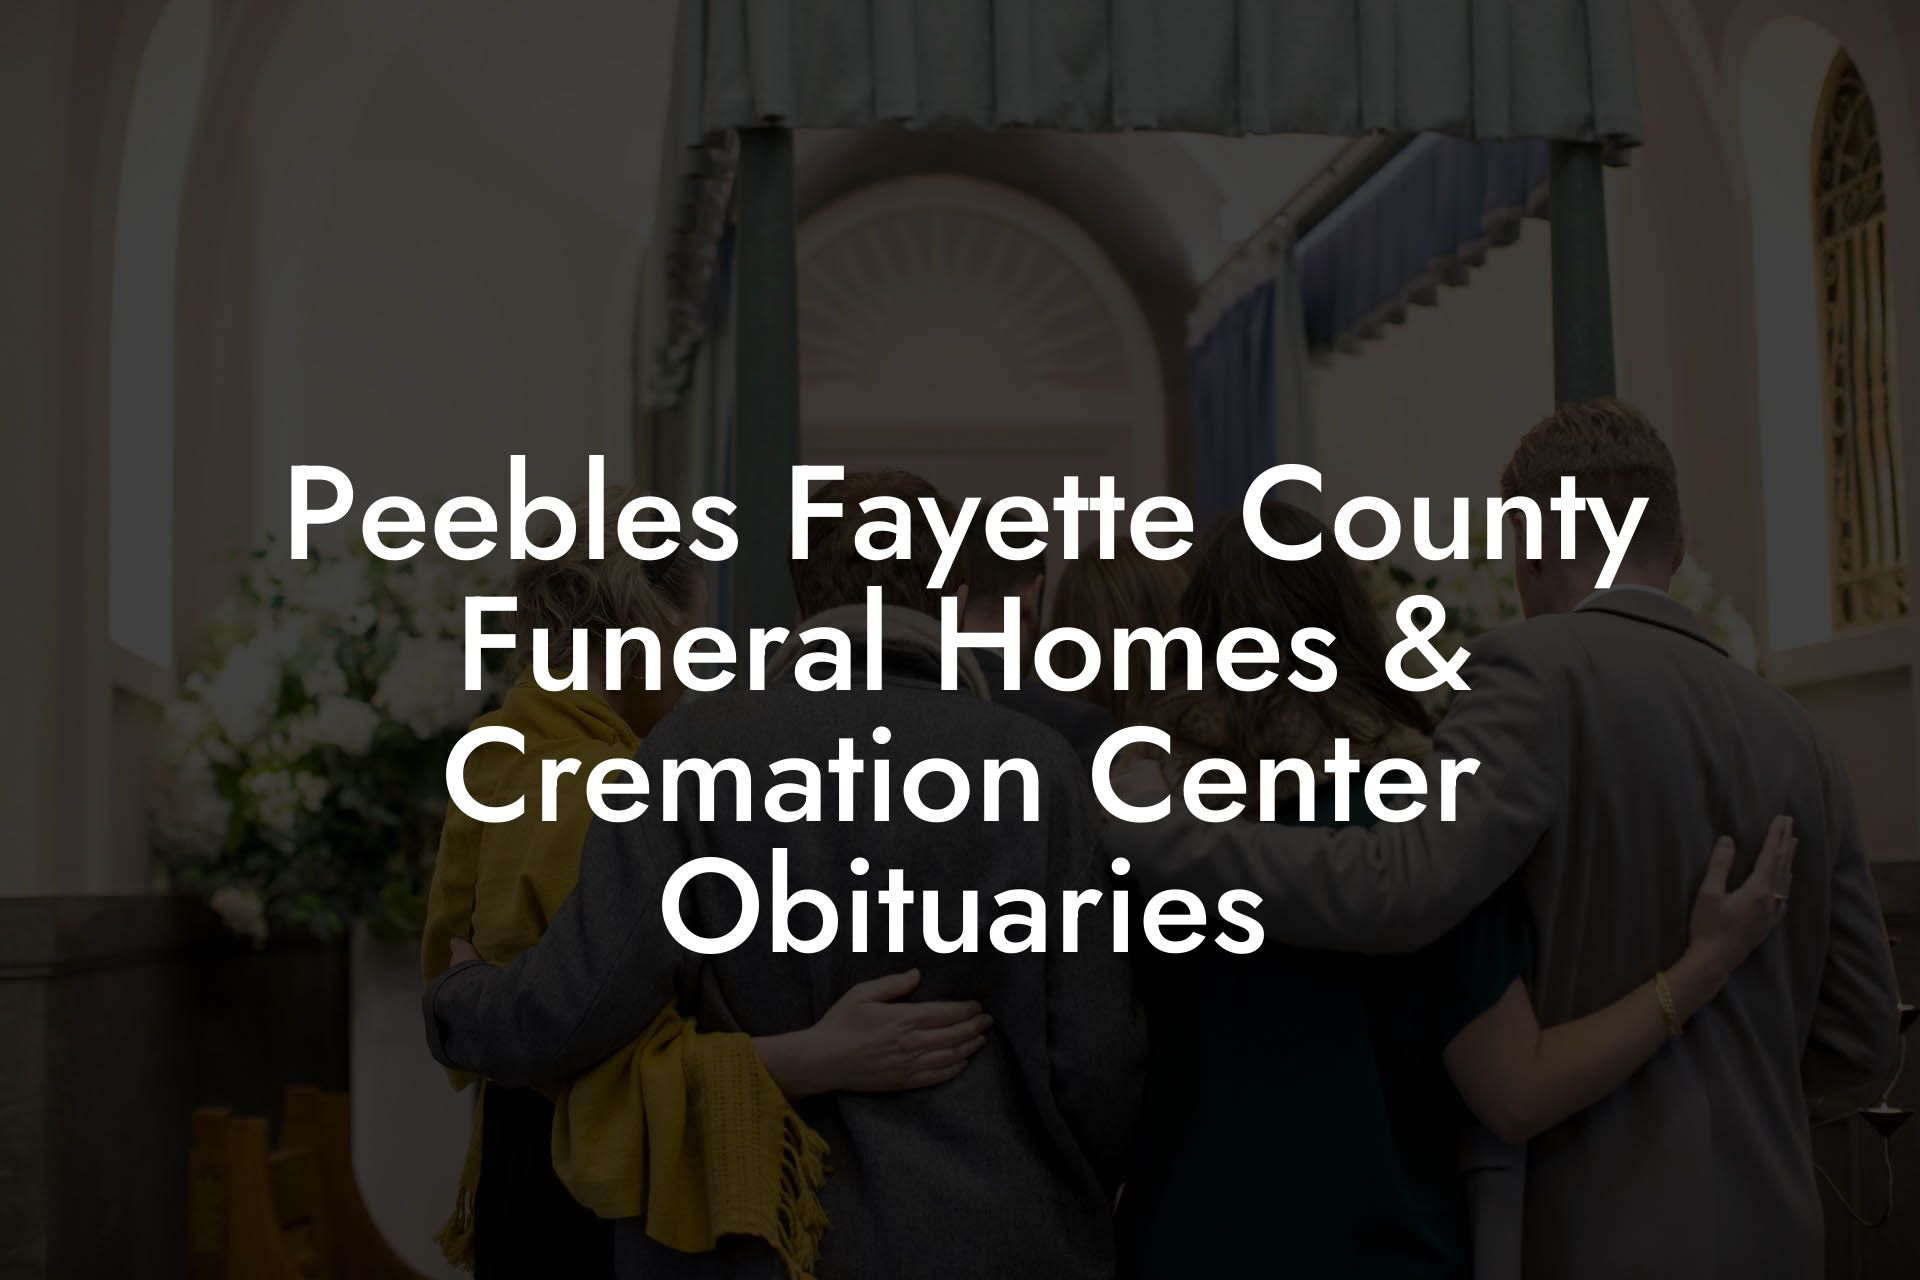 Peebles Fayette County Funeral Homes Cremation Center Obituaries Eulogy Assistant